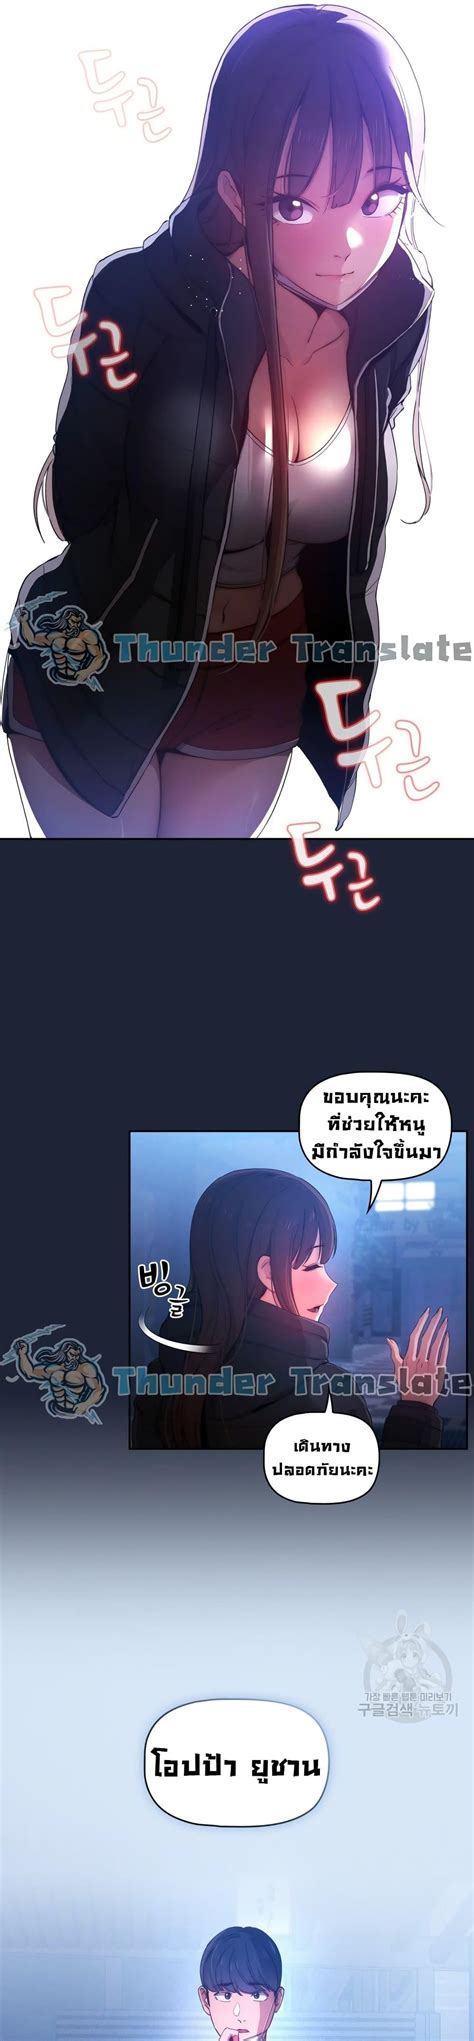 Private Tutoring In These Trying Times ตอนที่ 33 Th Mangathailand